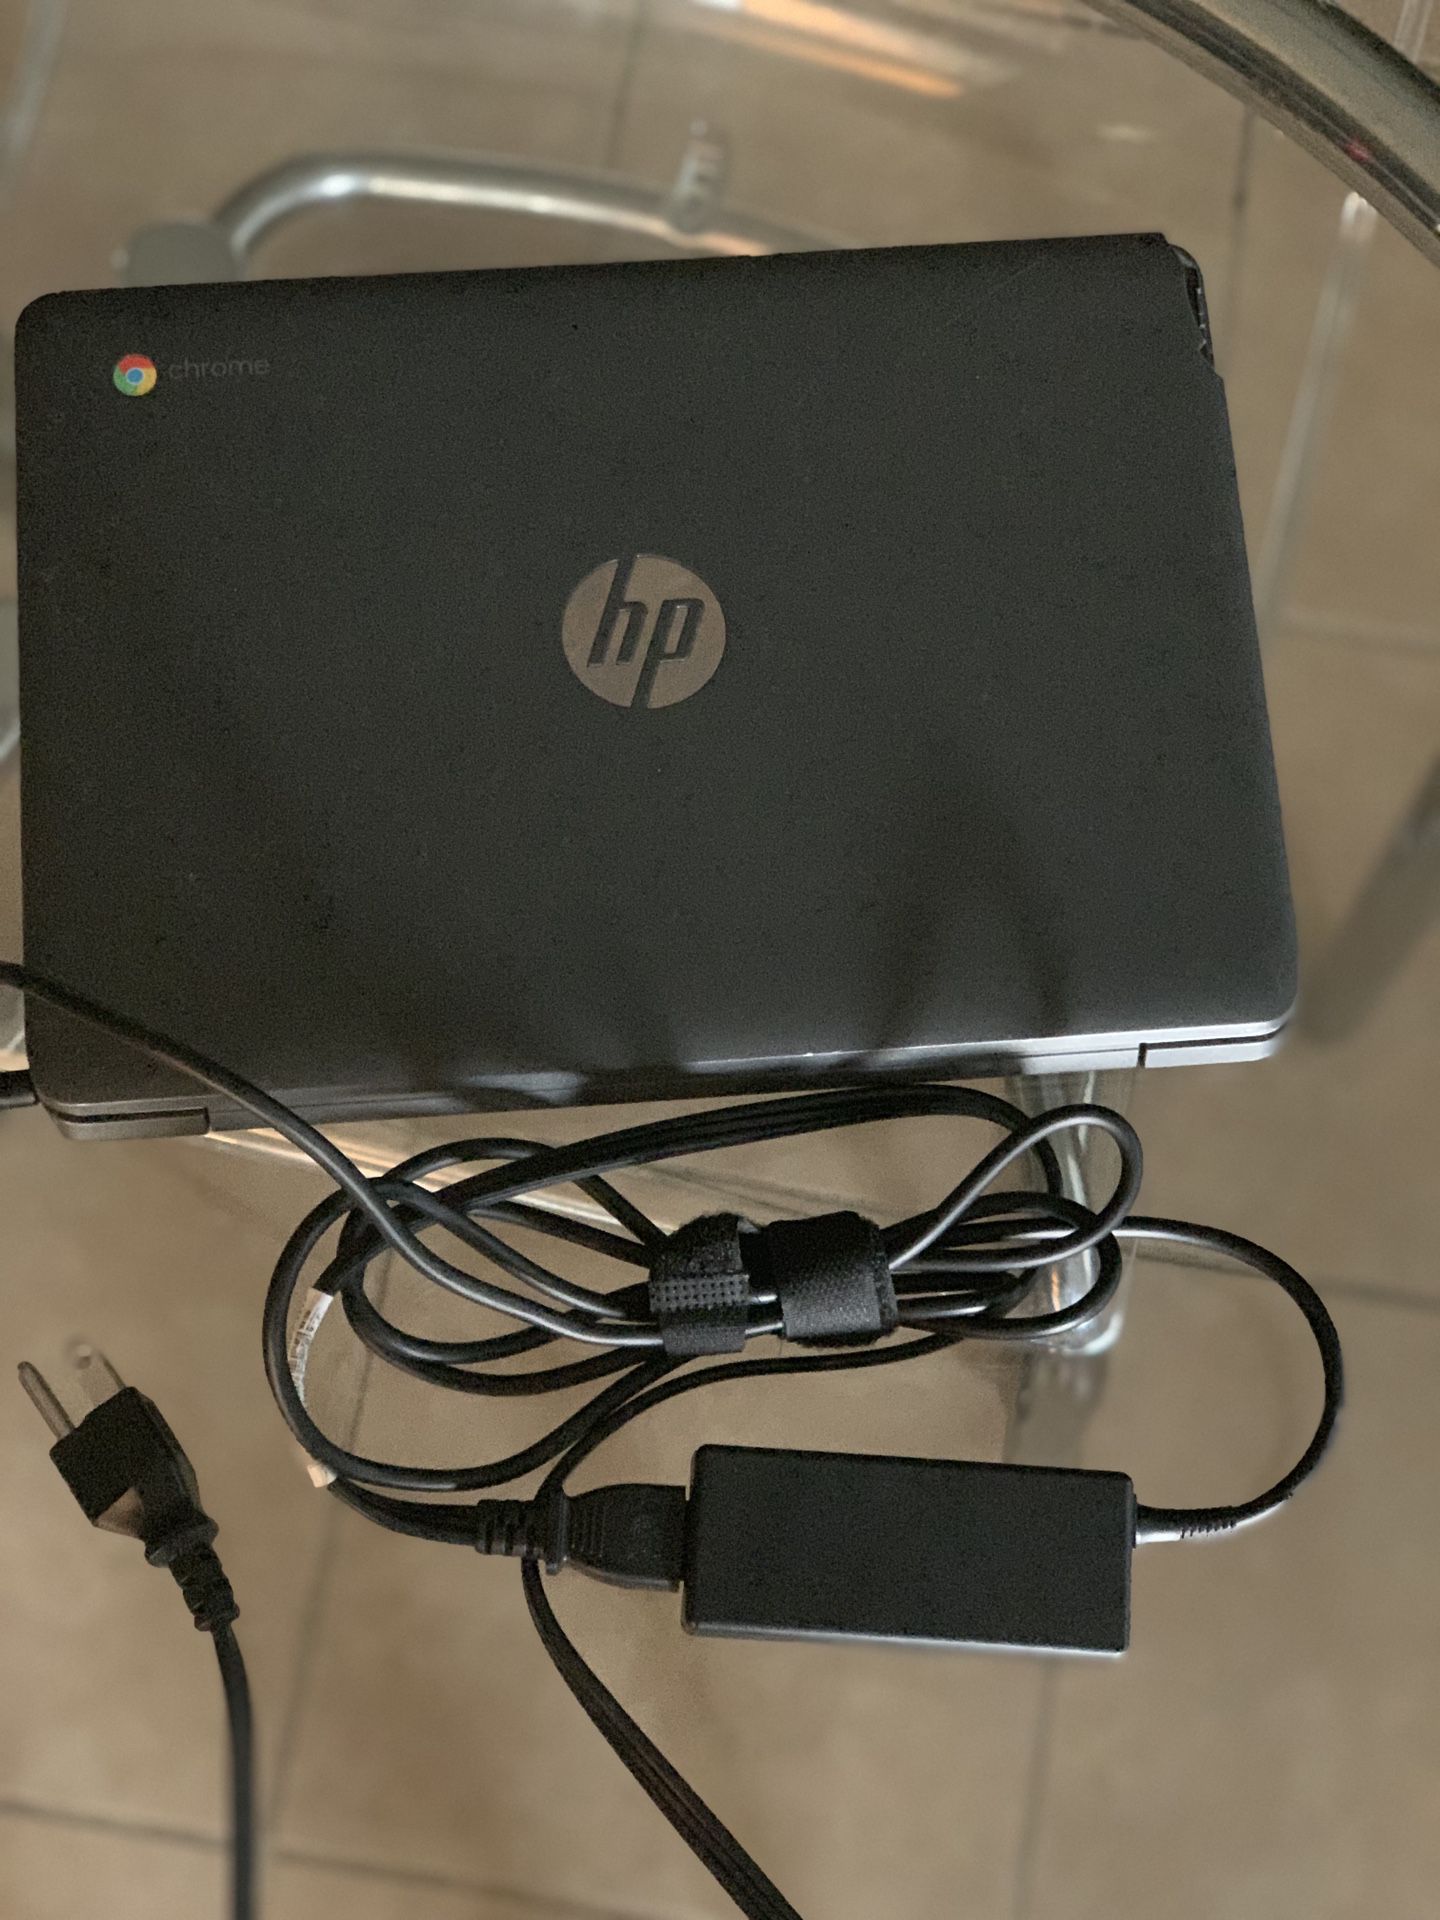 HP Chromebook with charger